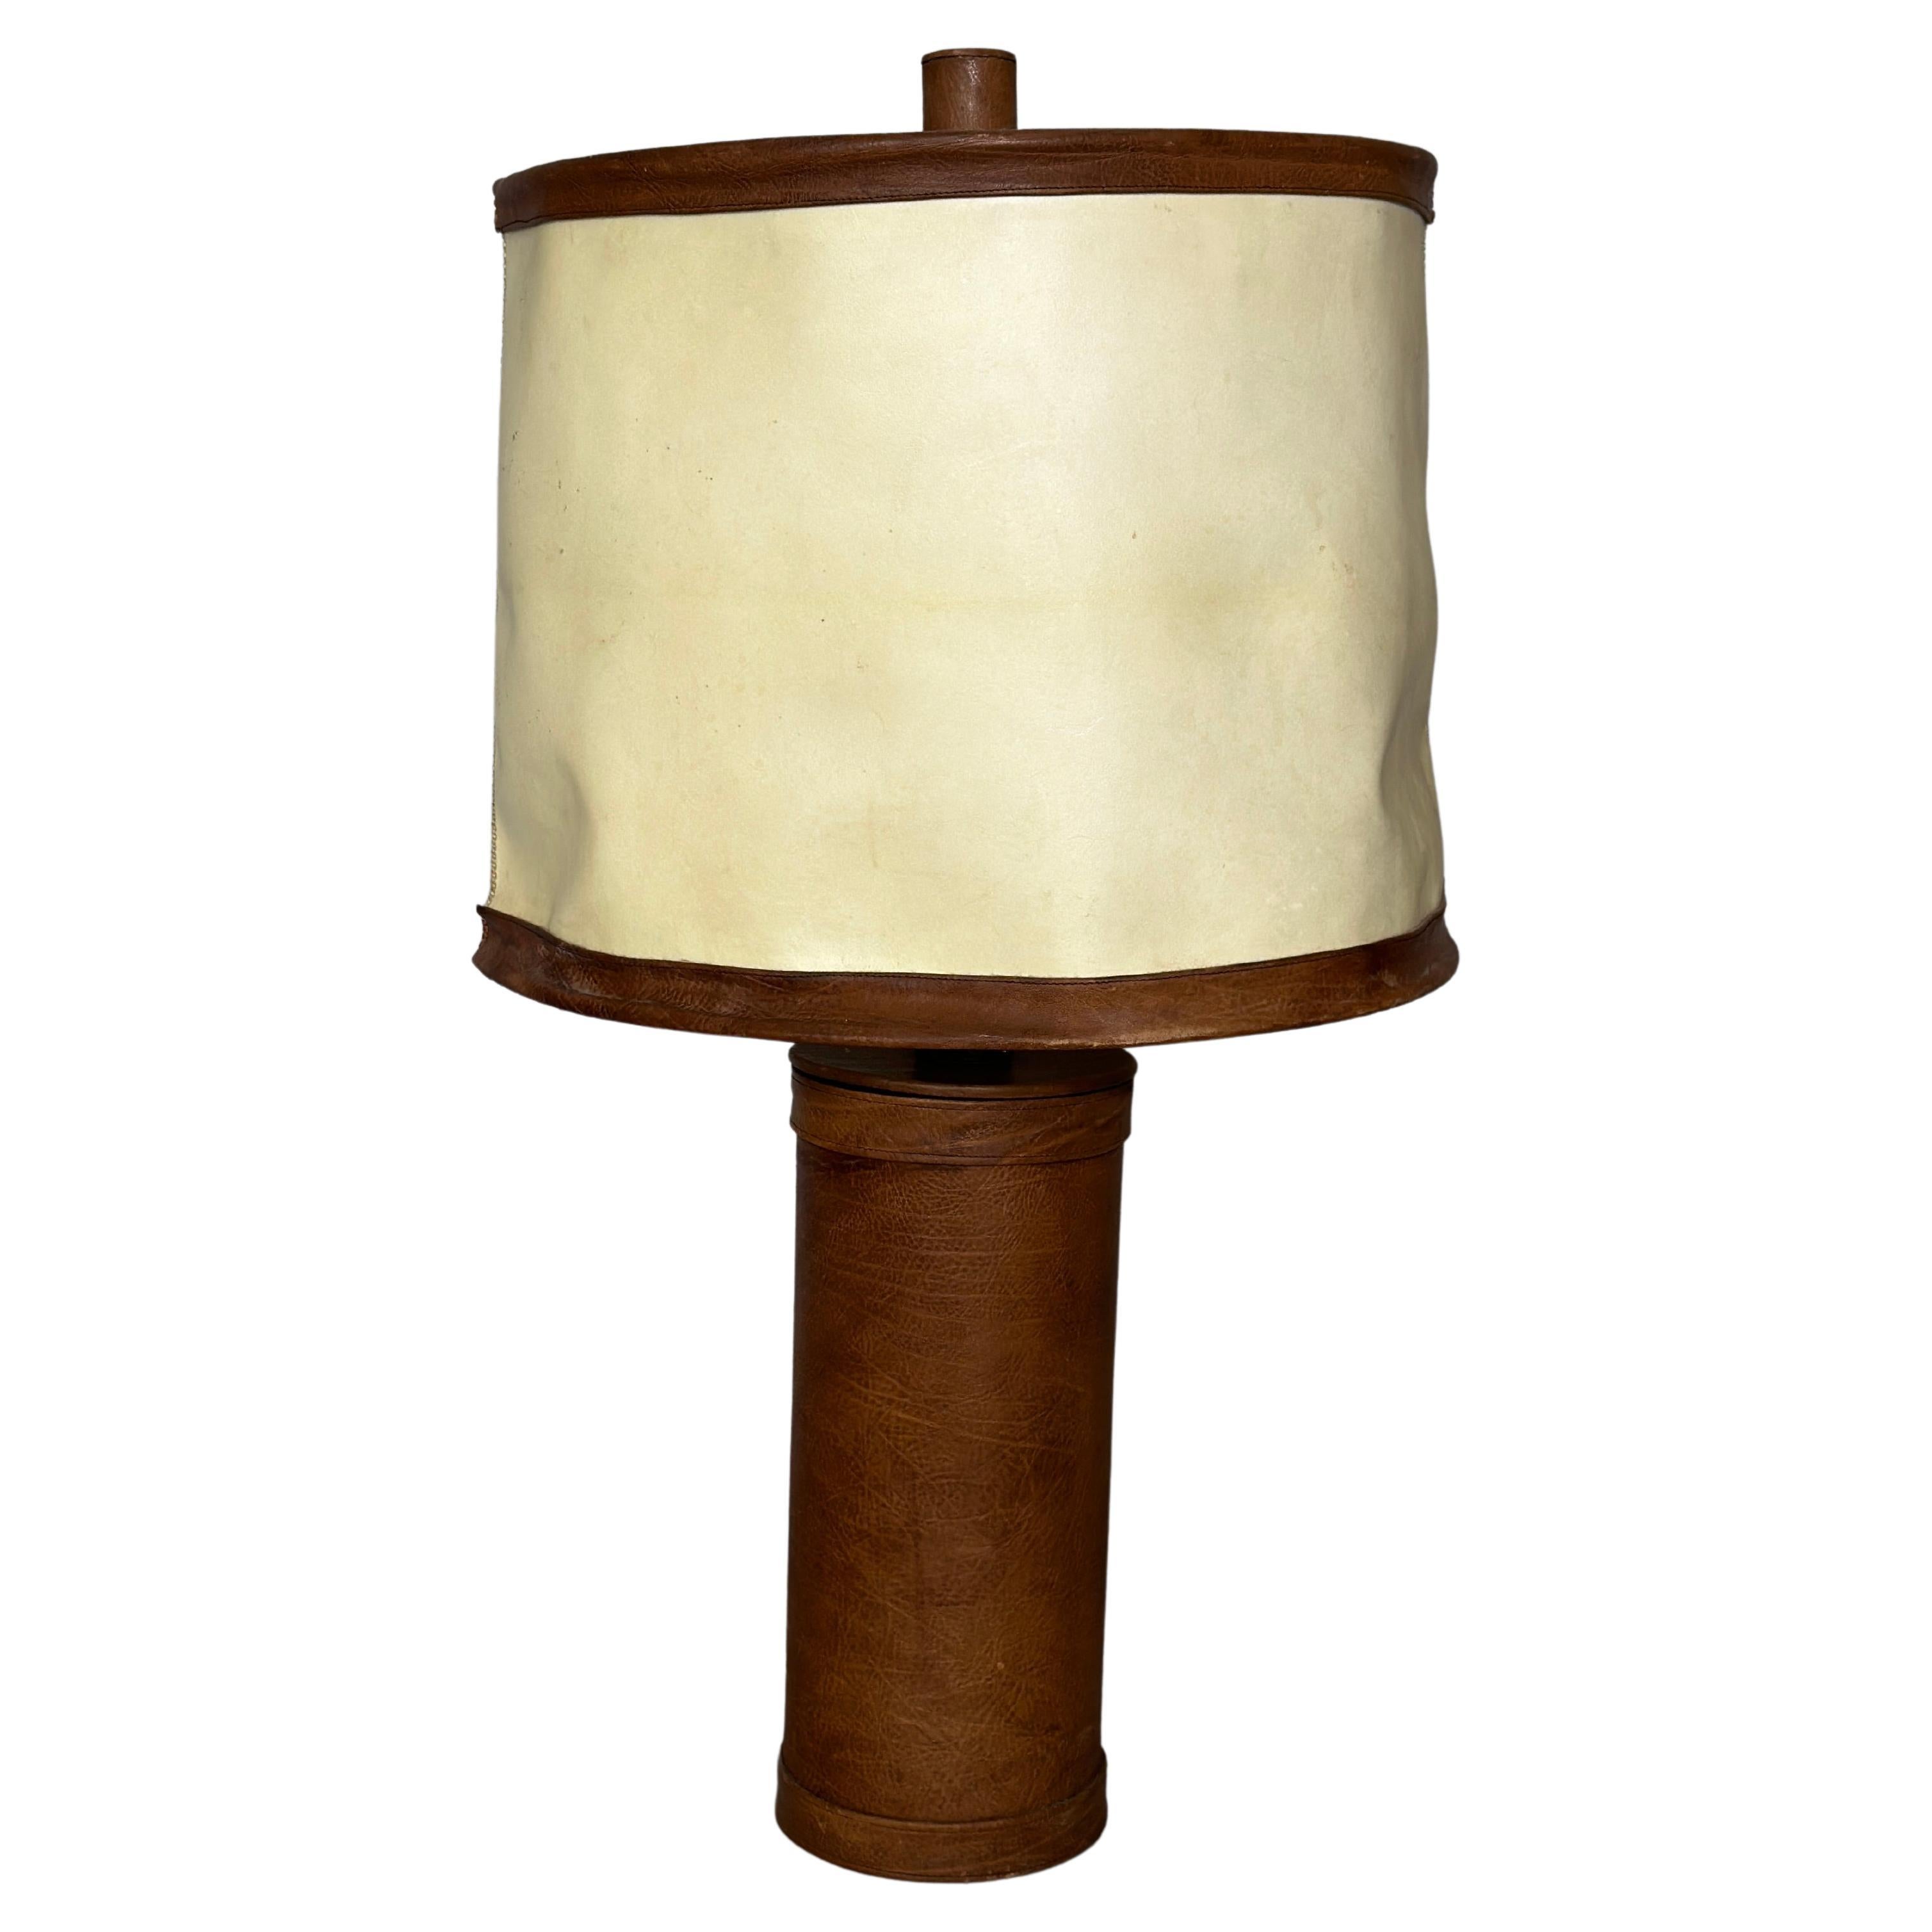 Charlotte Wawer Leather Table Lamp, 1940s